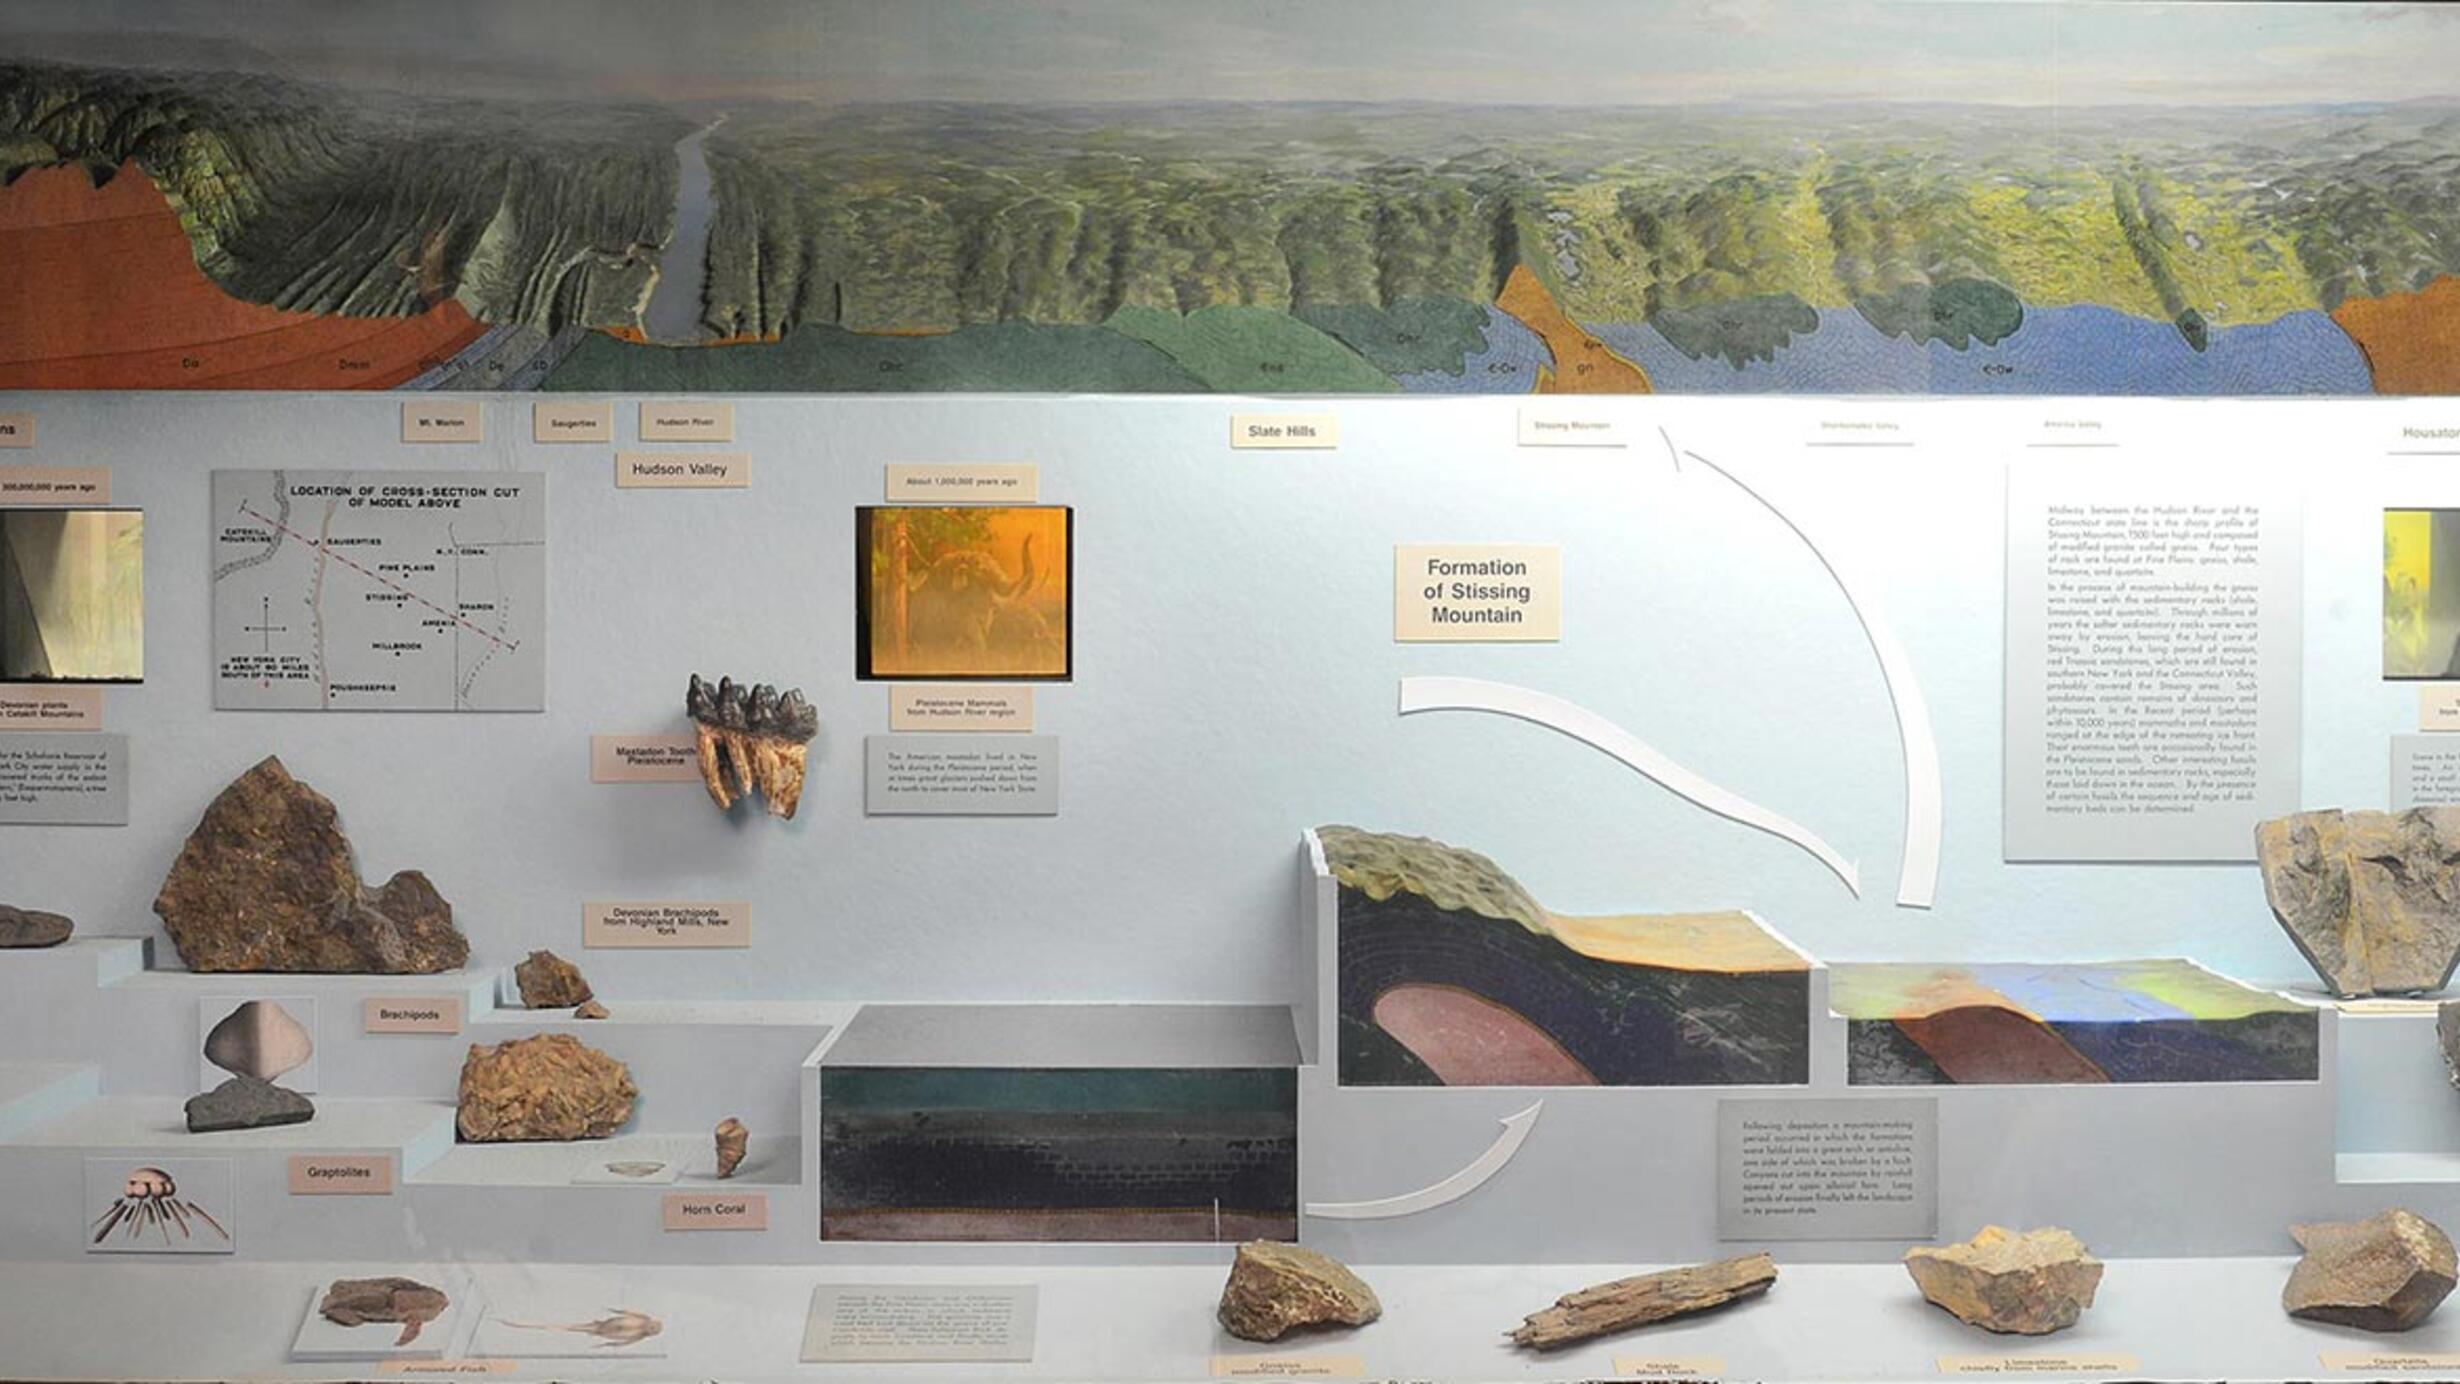 Museum case showing models and artifacts illustrating the geological history of Stissing Mountain